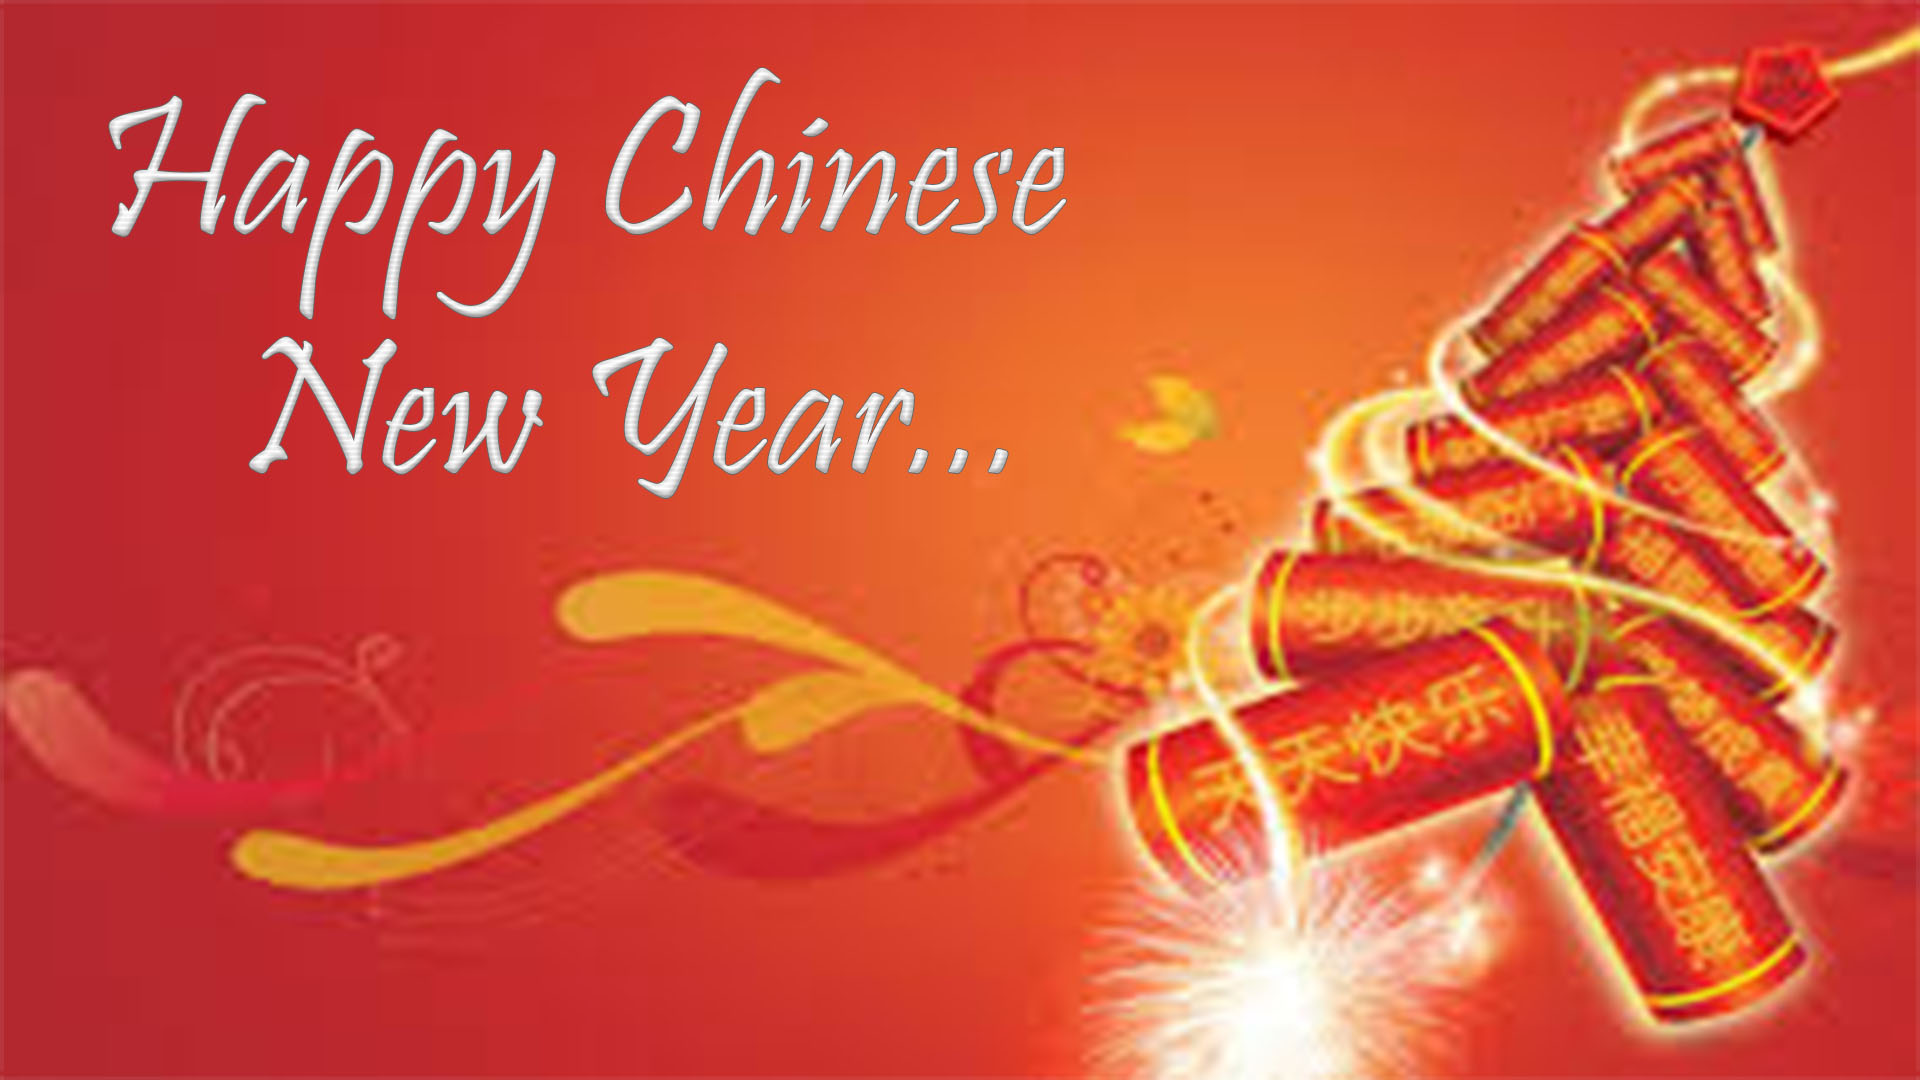 new year of chinese 2019 image